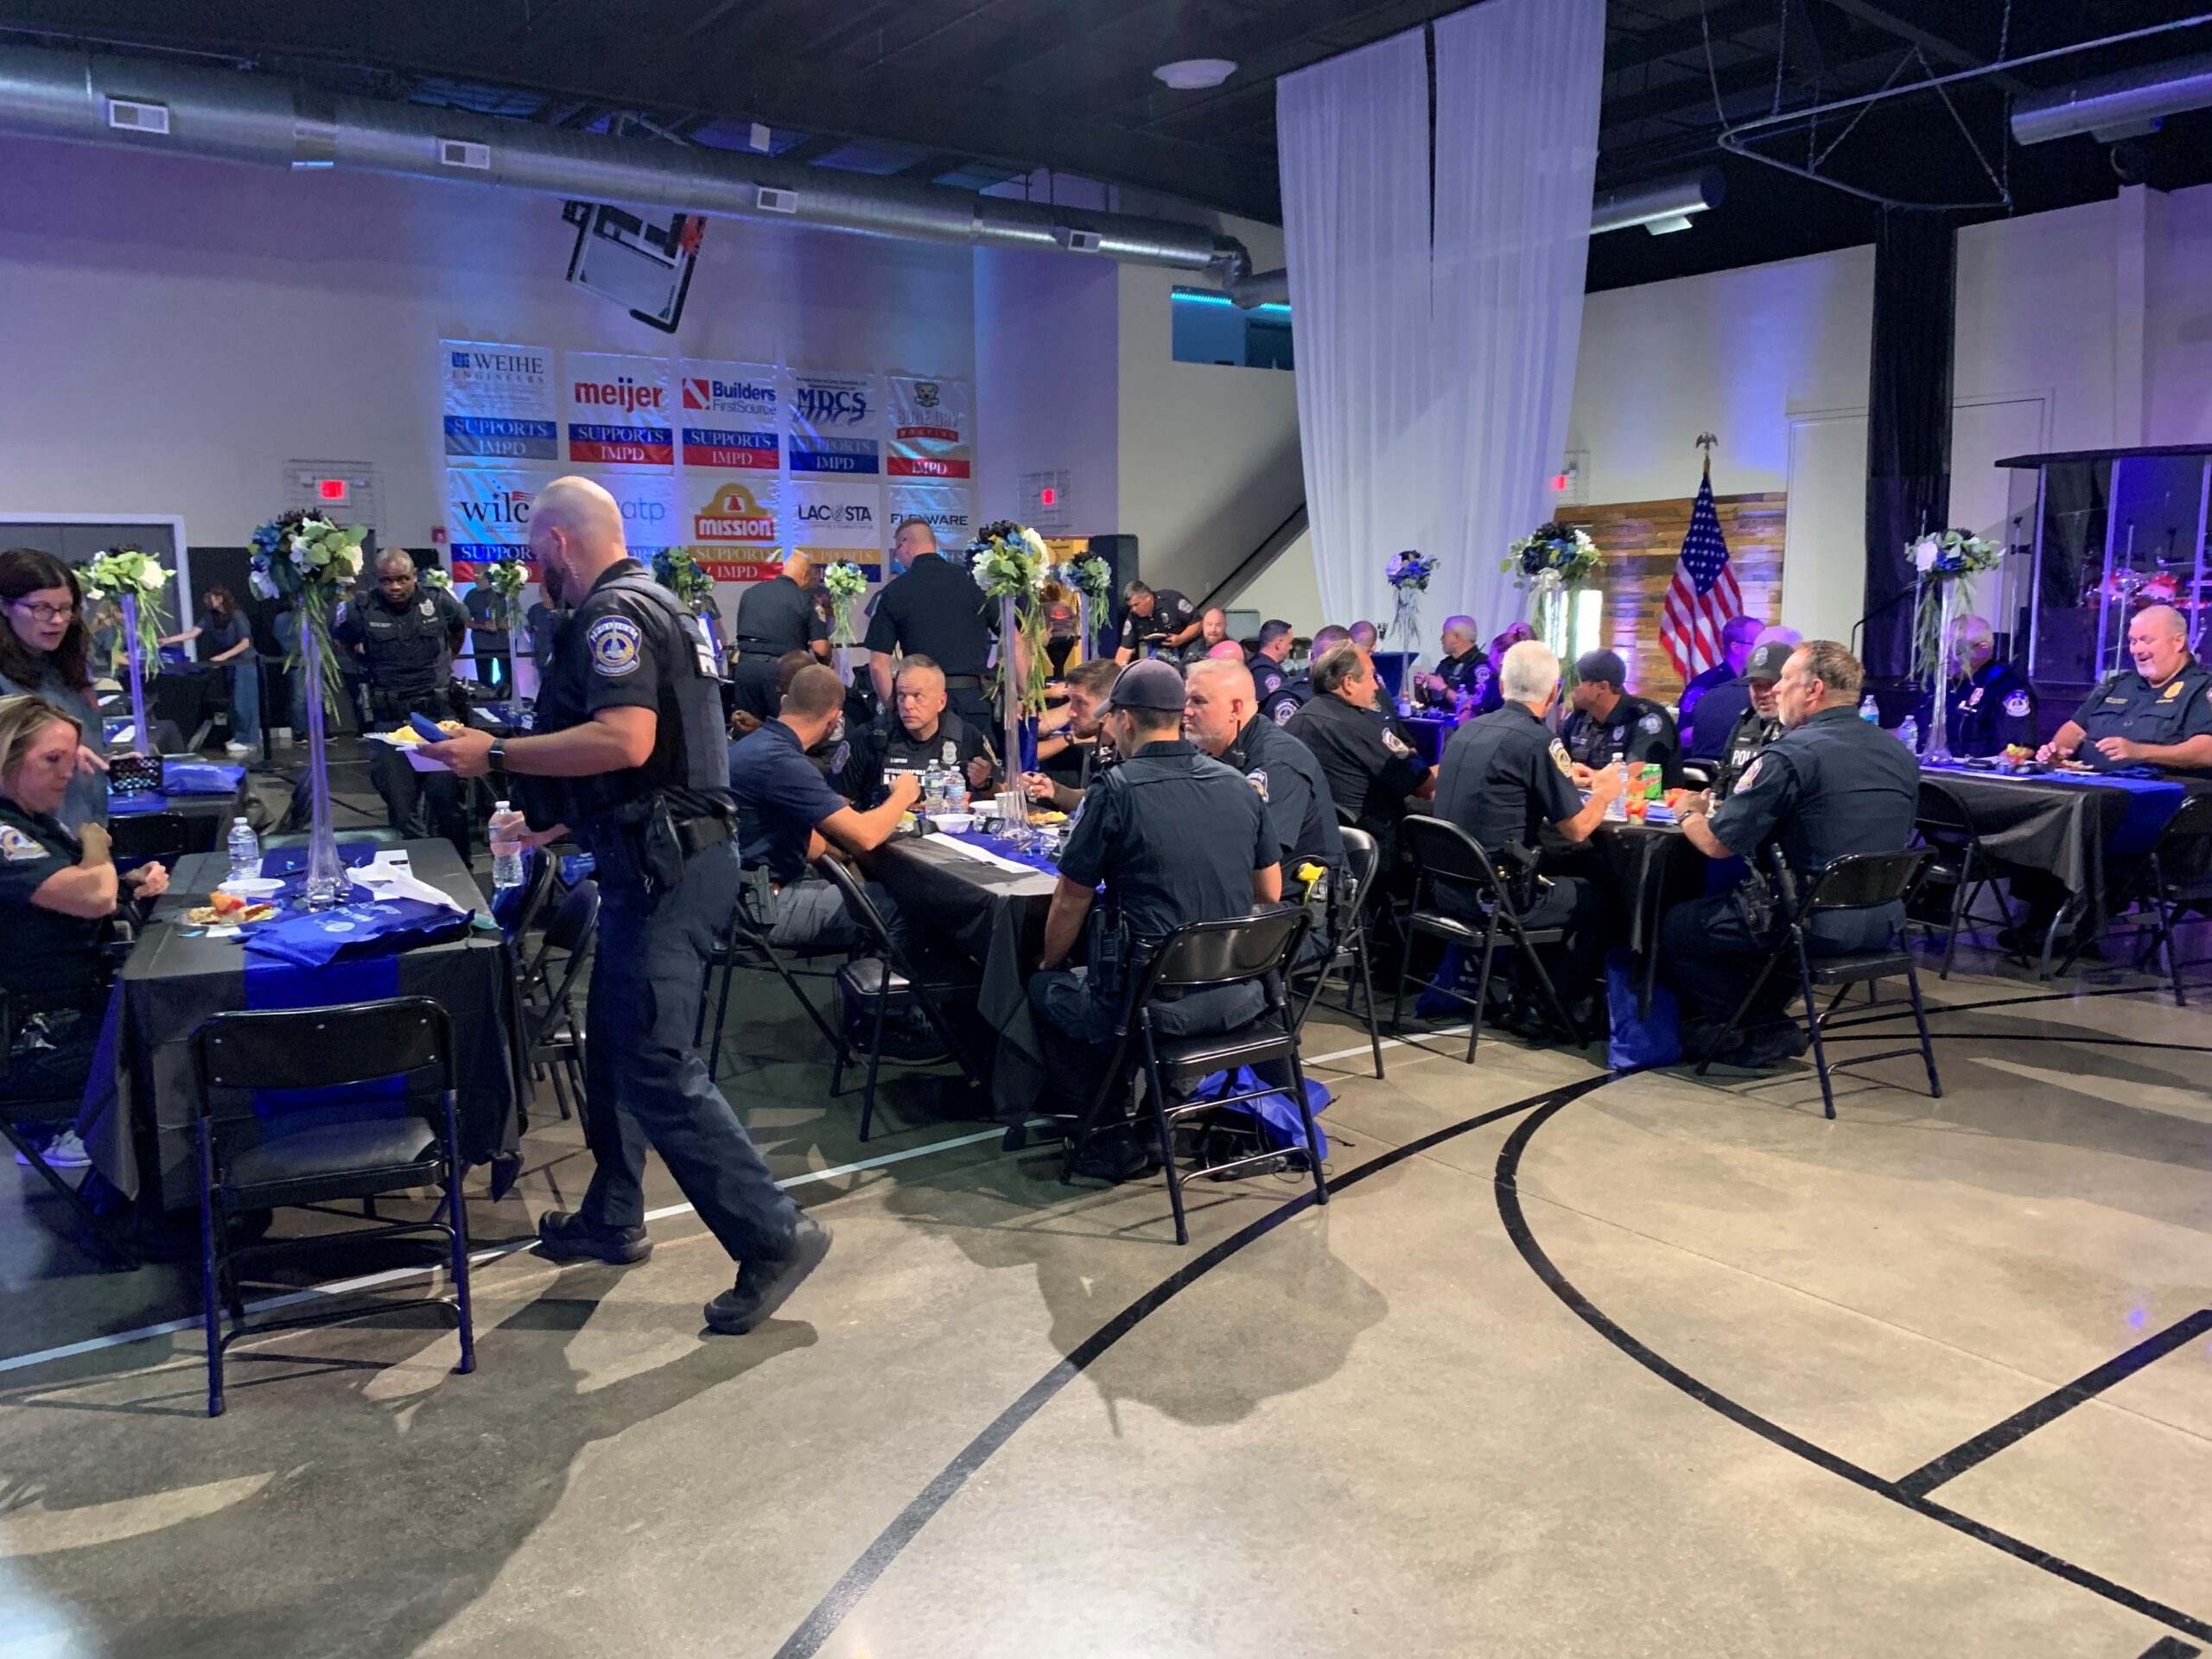 Indianapolis church feeds IMPD officers at 15th annual ‘Roll Call’